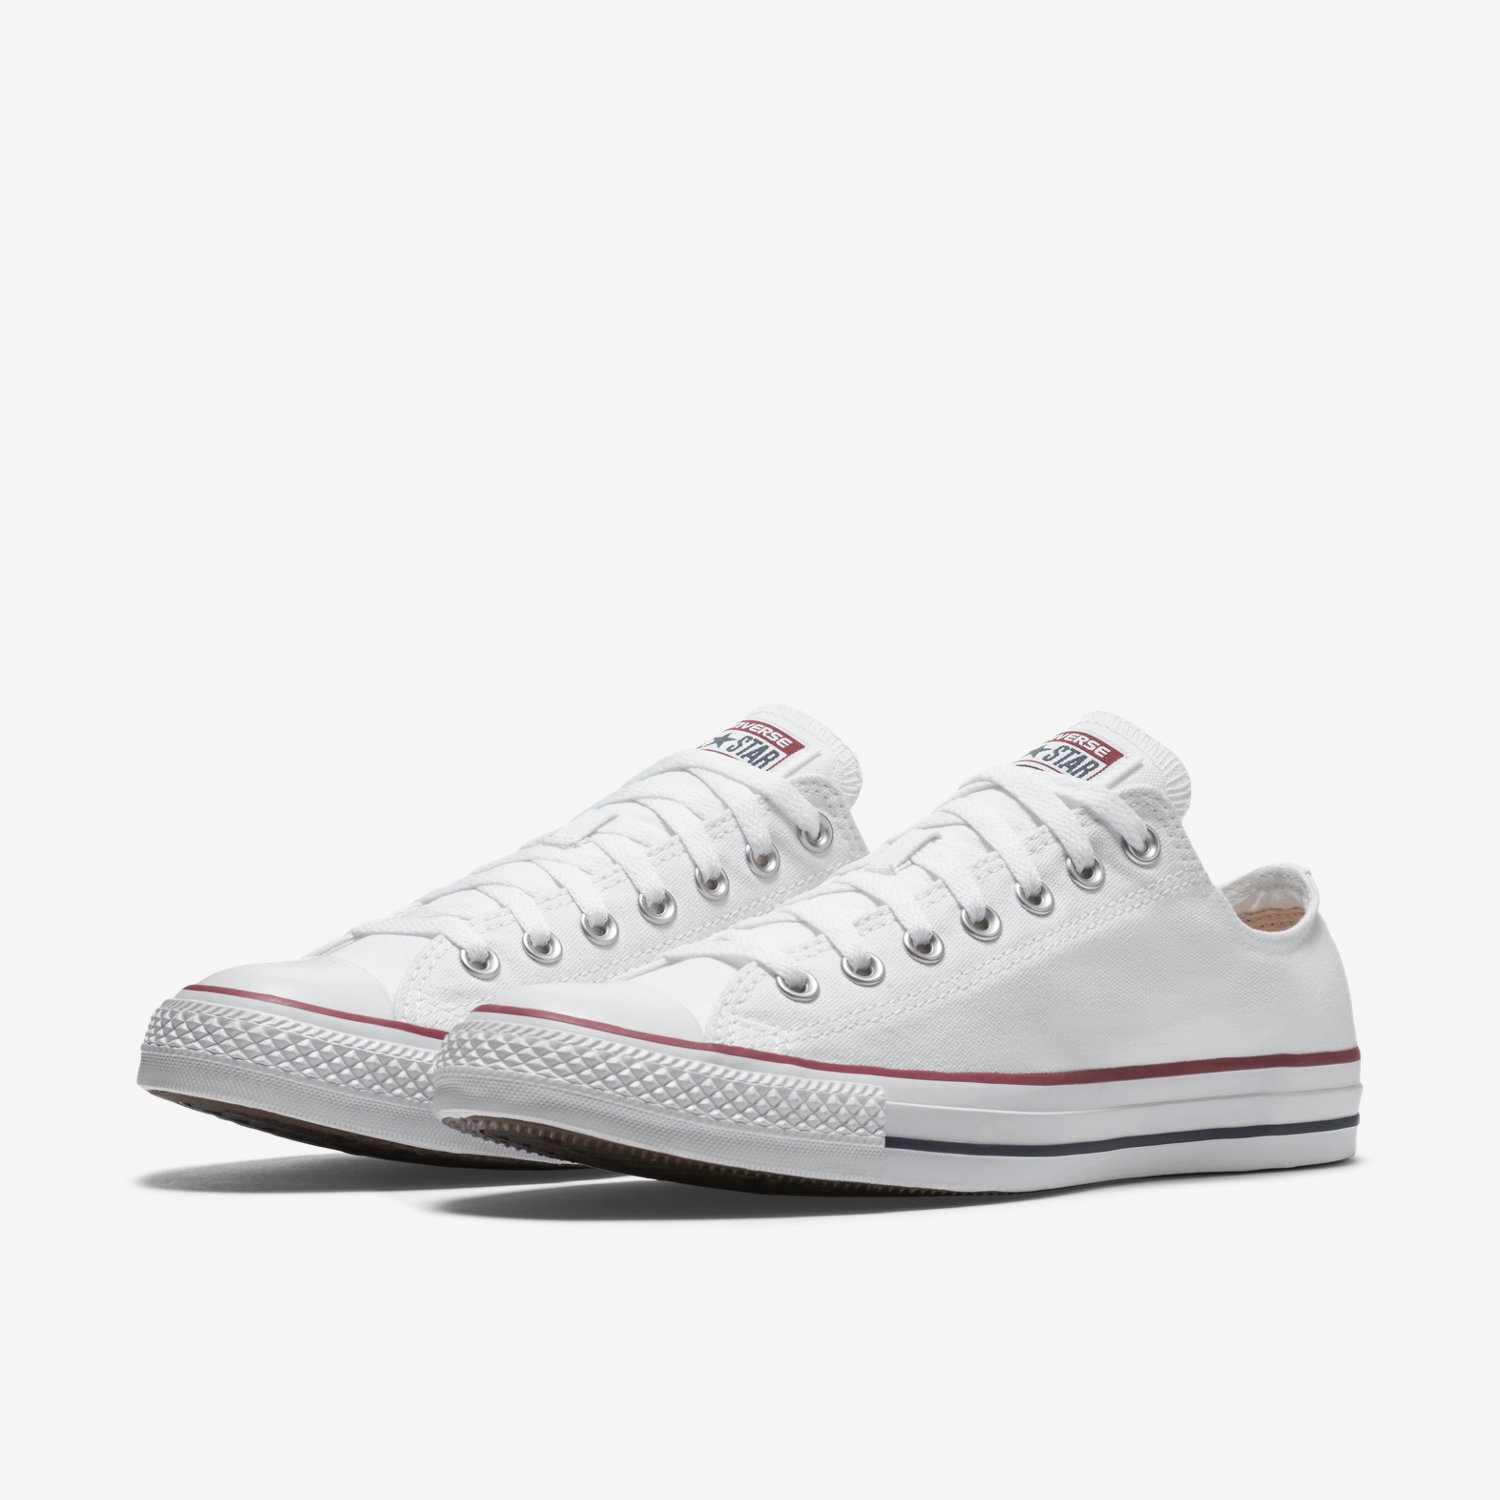 White converse converse chuck taylor all star low top unisex shoe. nike.com MSQHUJE